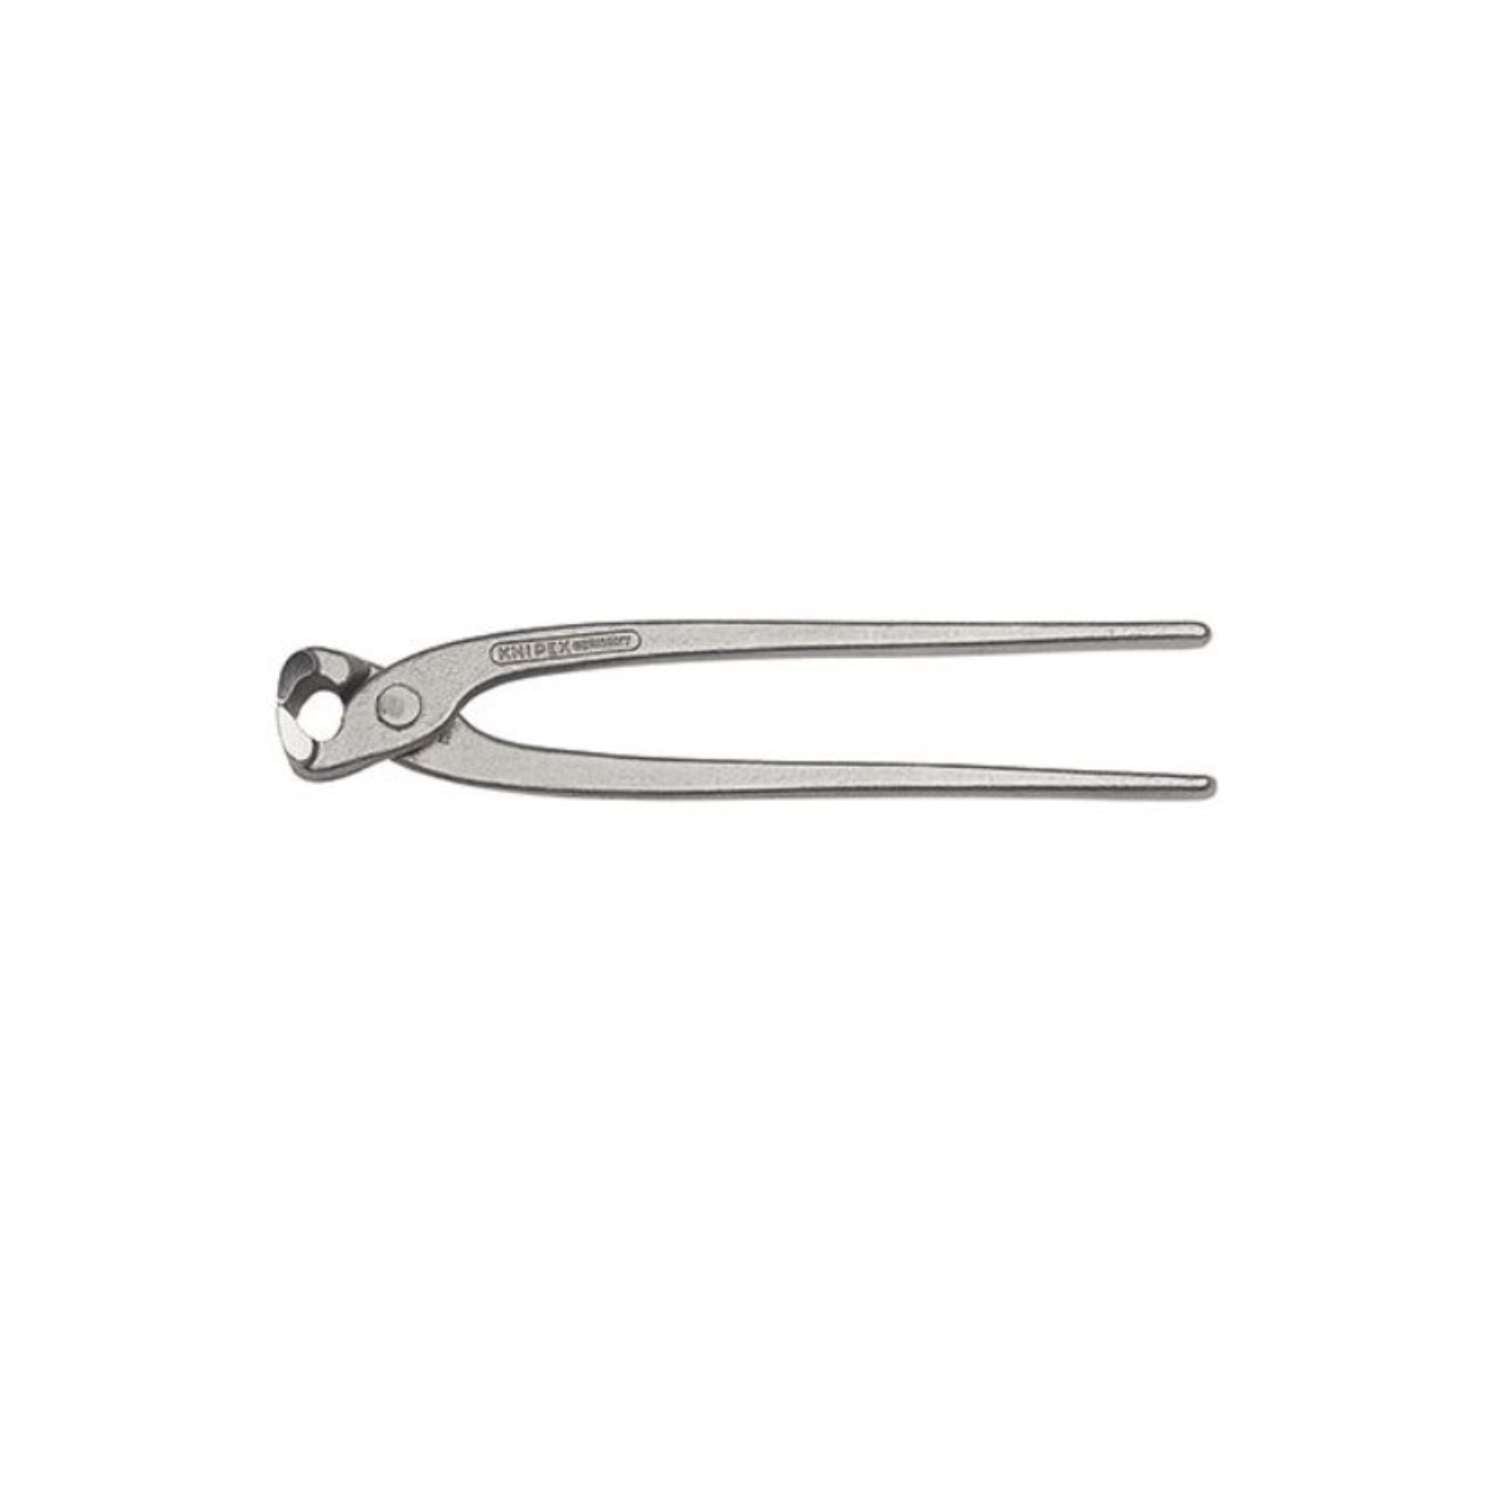 Ironmongers' and Cementers' Pincers 220 - 280 mm - B 1905 02 ABC